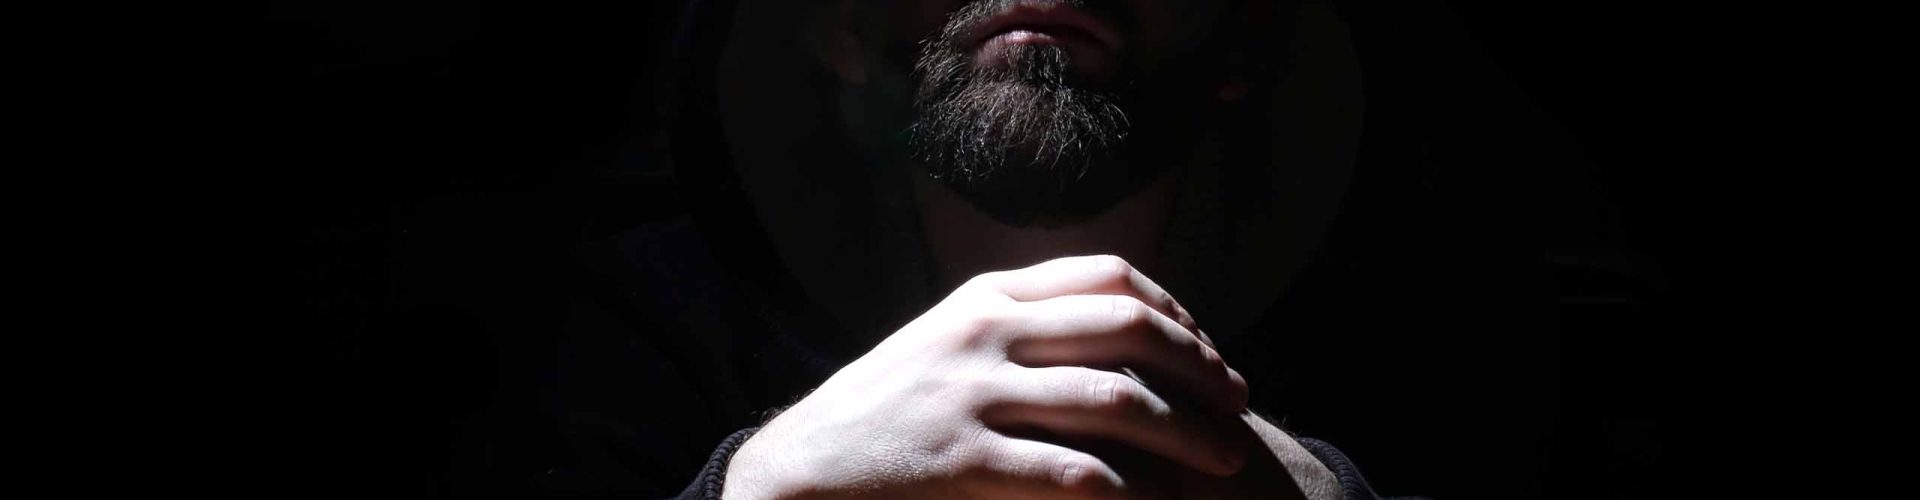 A bearded man shrouded in a hood holds his hands together.